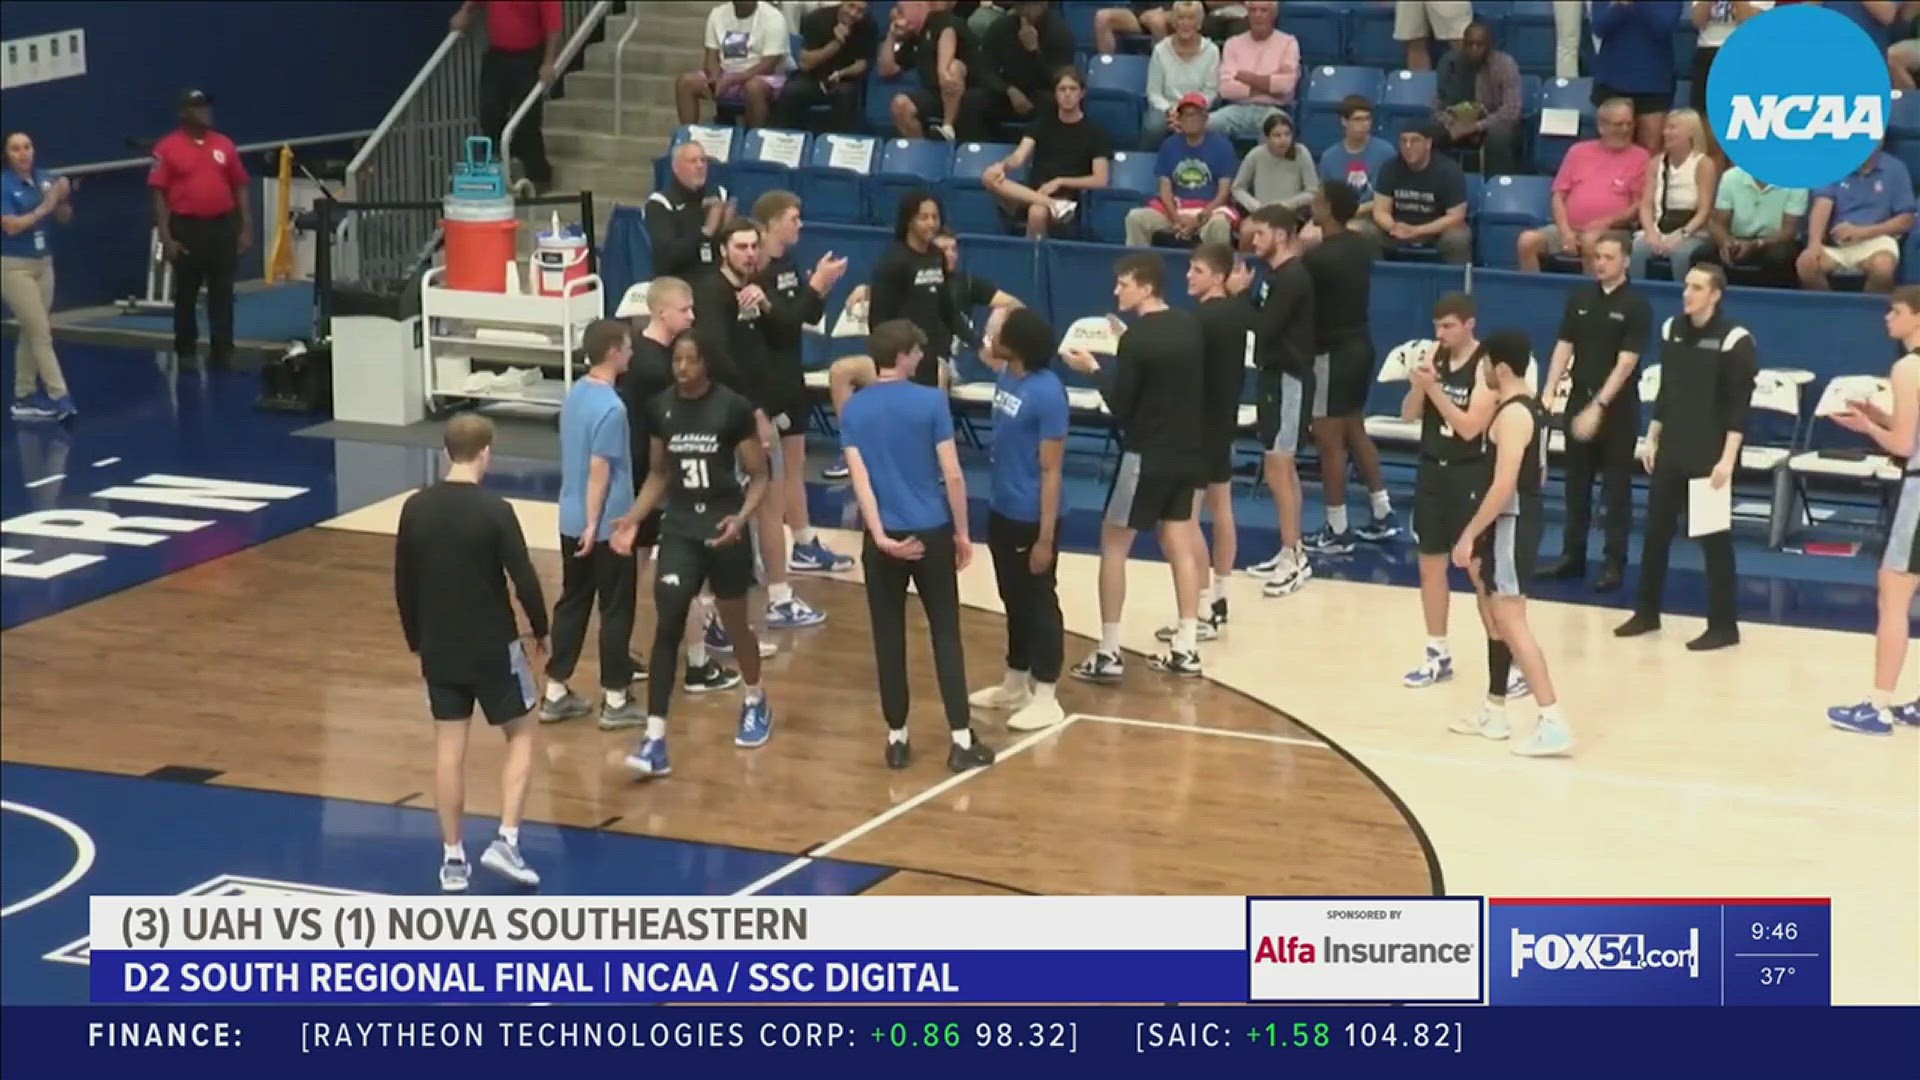 The UAH men's basketball team saw its incredible NCAA tournament run come to a close in the South Regional Final, falling to No. 1 seed Nova Southeastern 87-62.